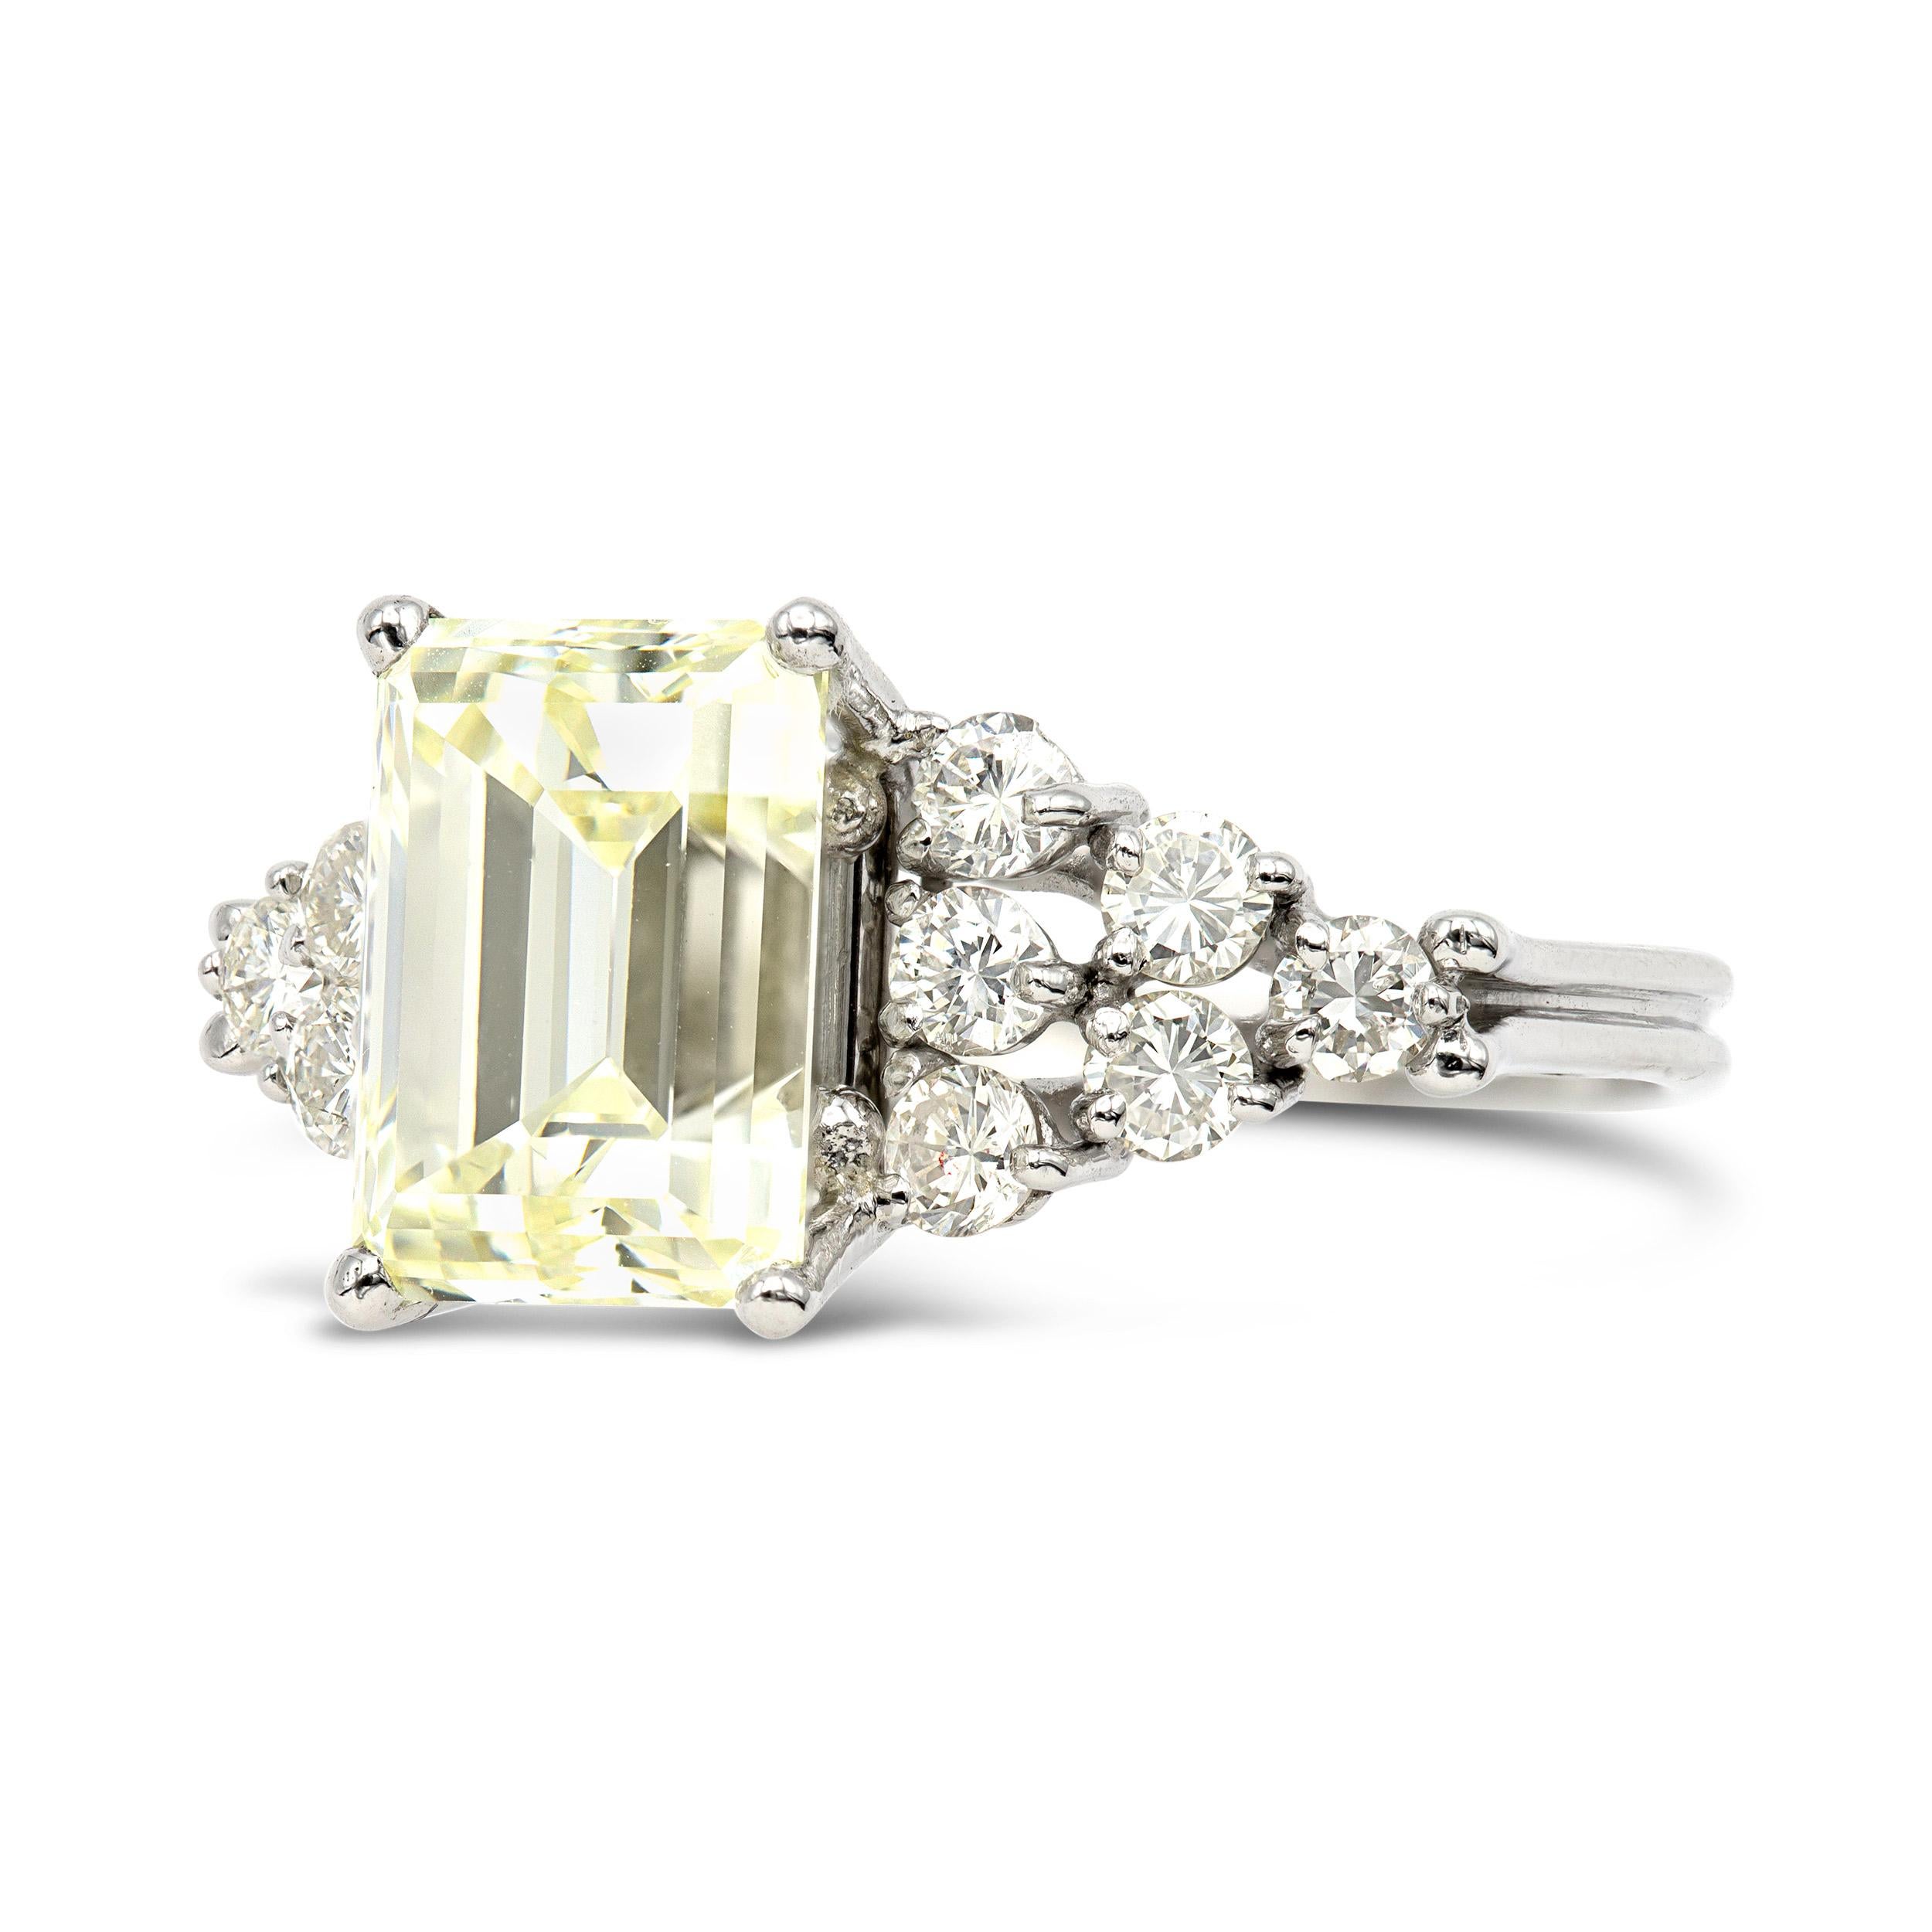 This engagement ring hosts a massive emerald cut diamond that seriously packs a punch. The center 4.15 carat, GIA certified, has those crispy faceting and proportions that we love to see in a vintage step cut. Flanked by clusters of old Euros, this